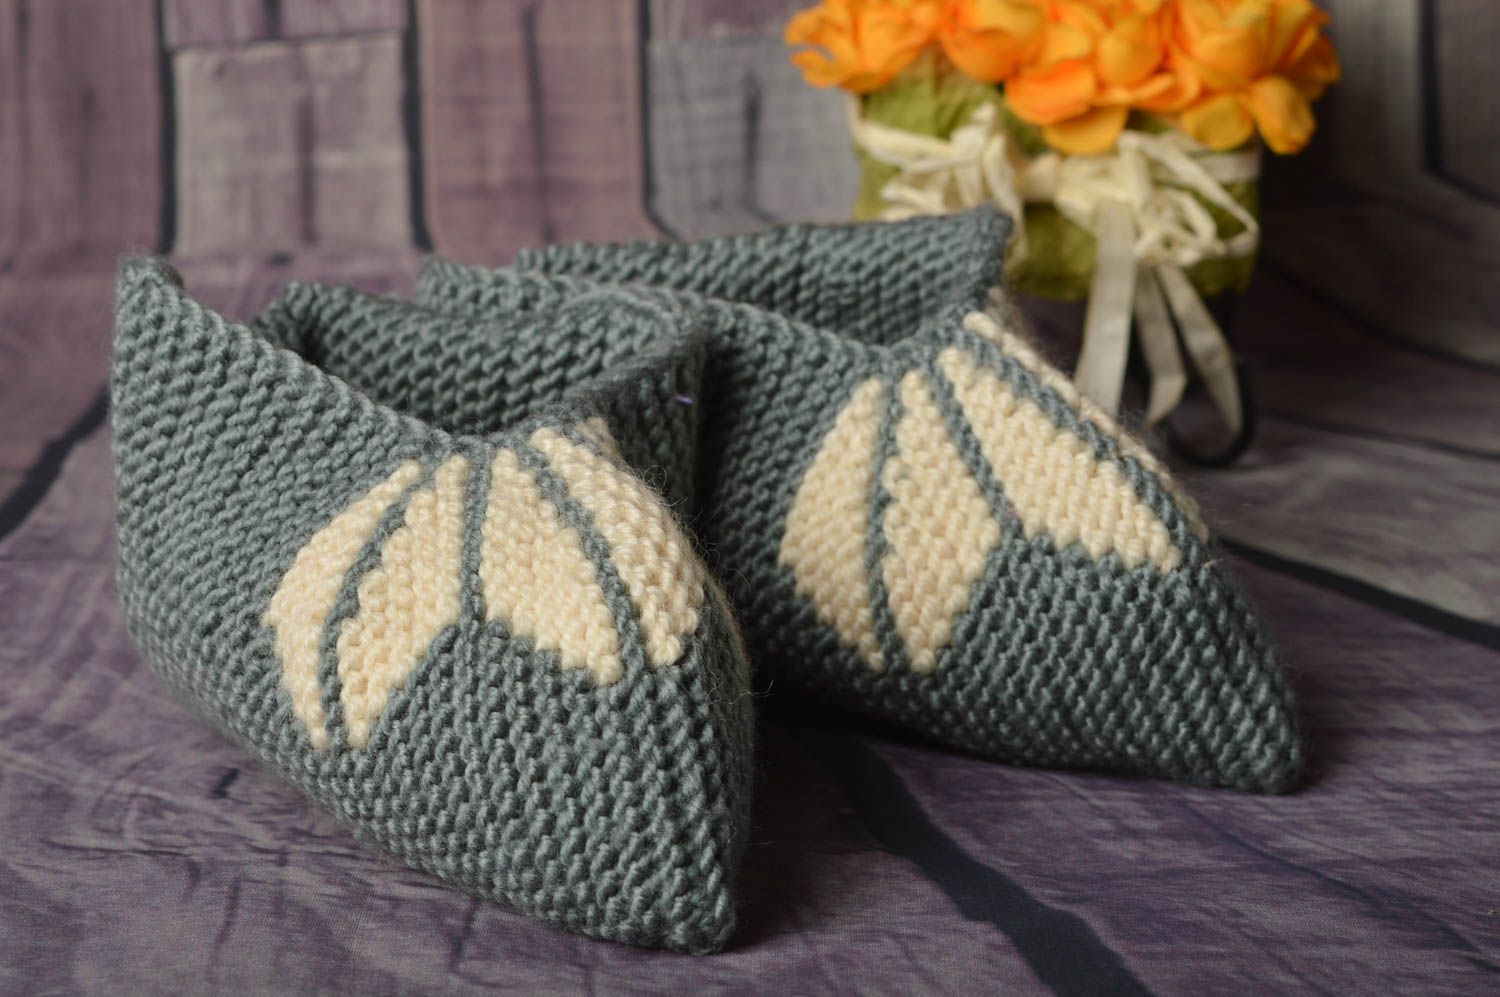 Handmade slippers warm woolen slippers for home stylish accessories for boys photo 1